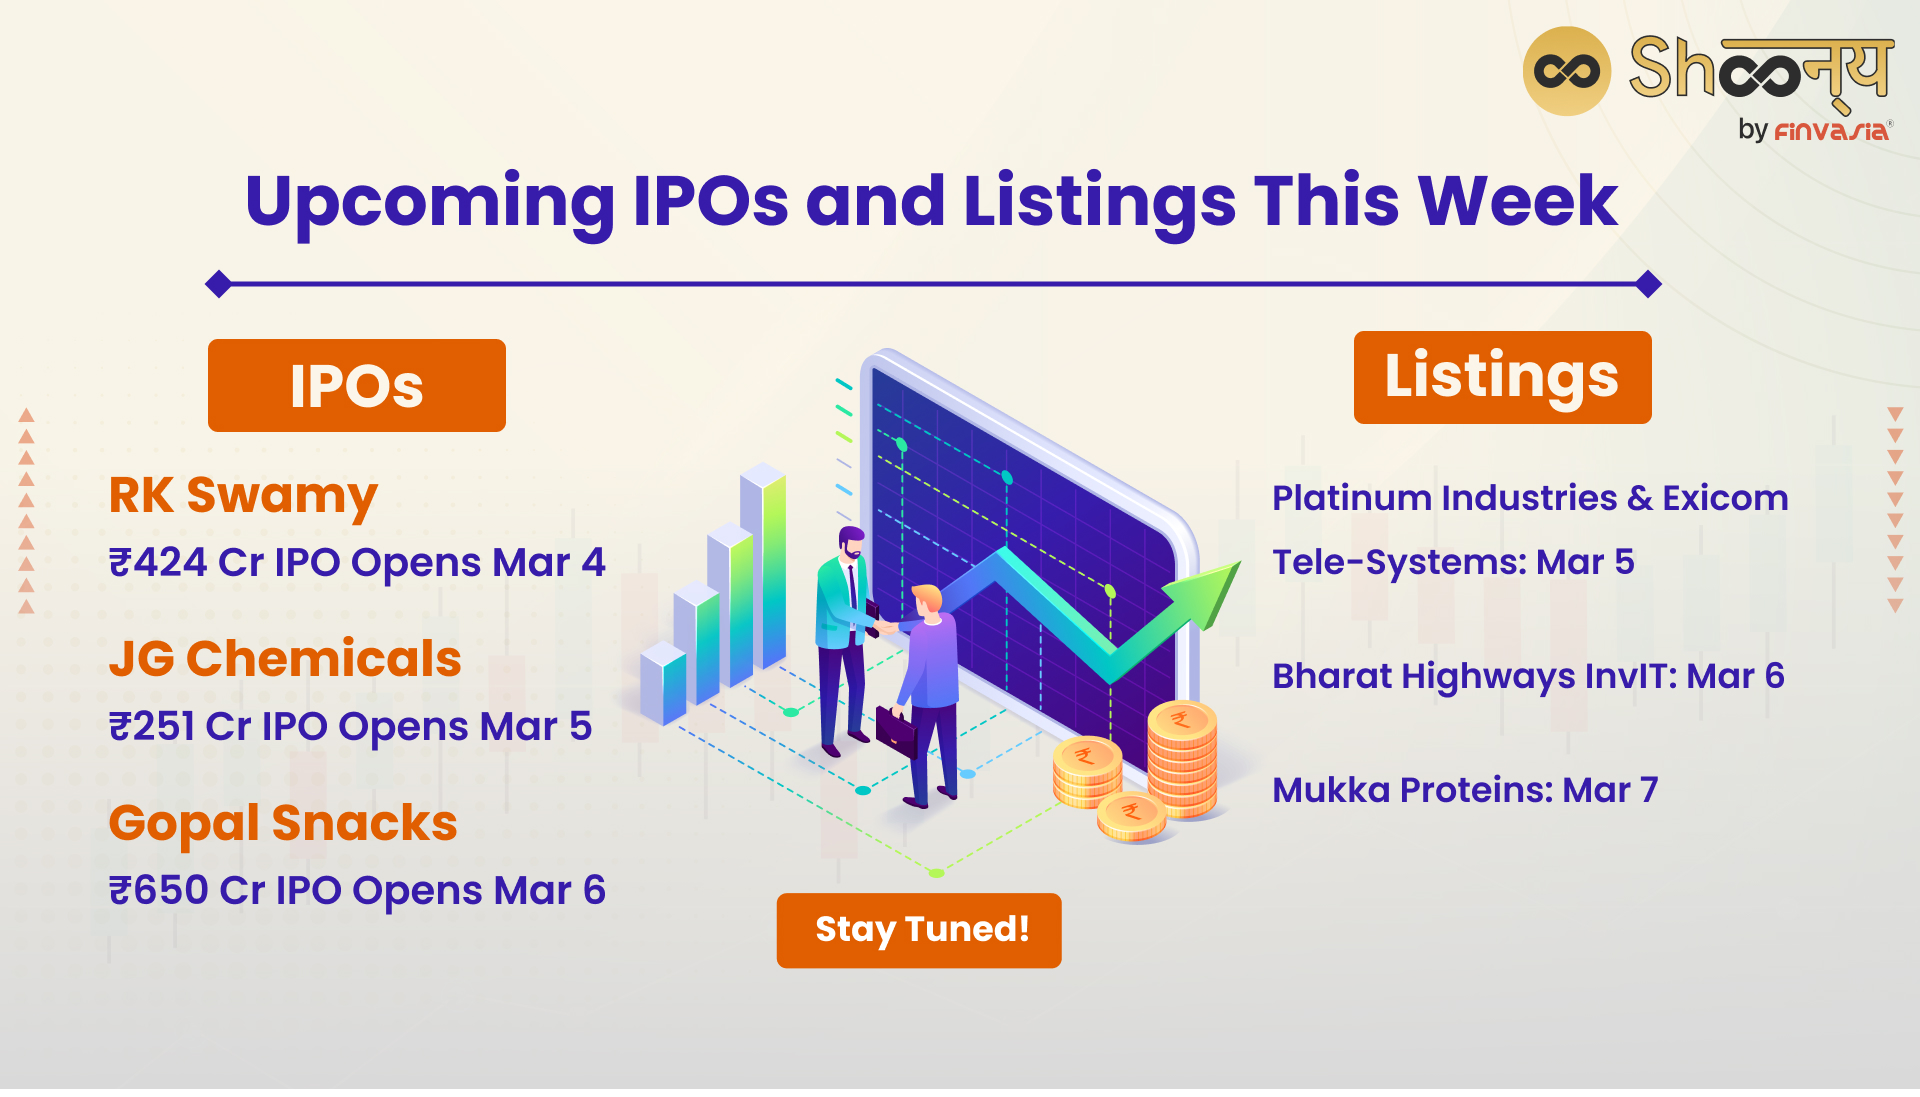 Explore the List of IPOs and Listings This Week